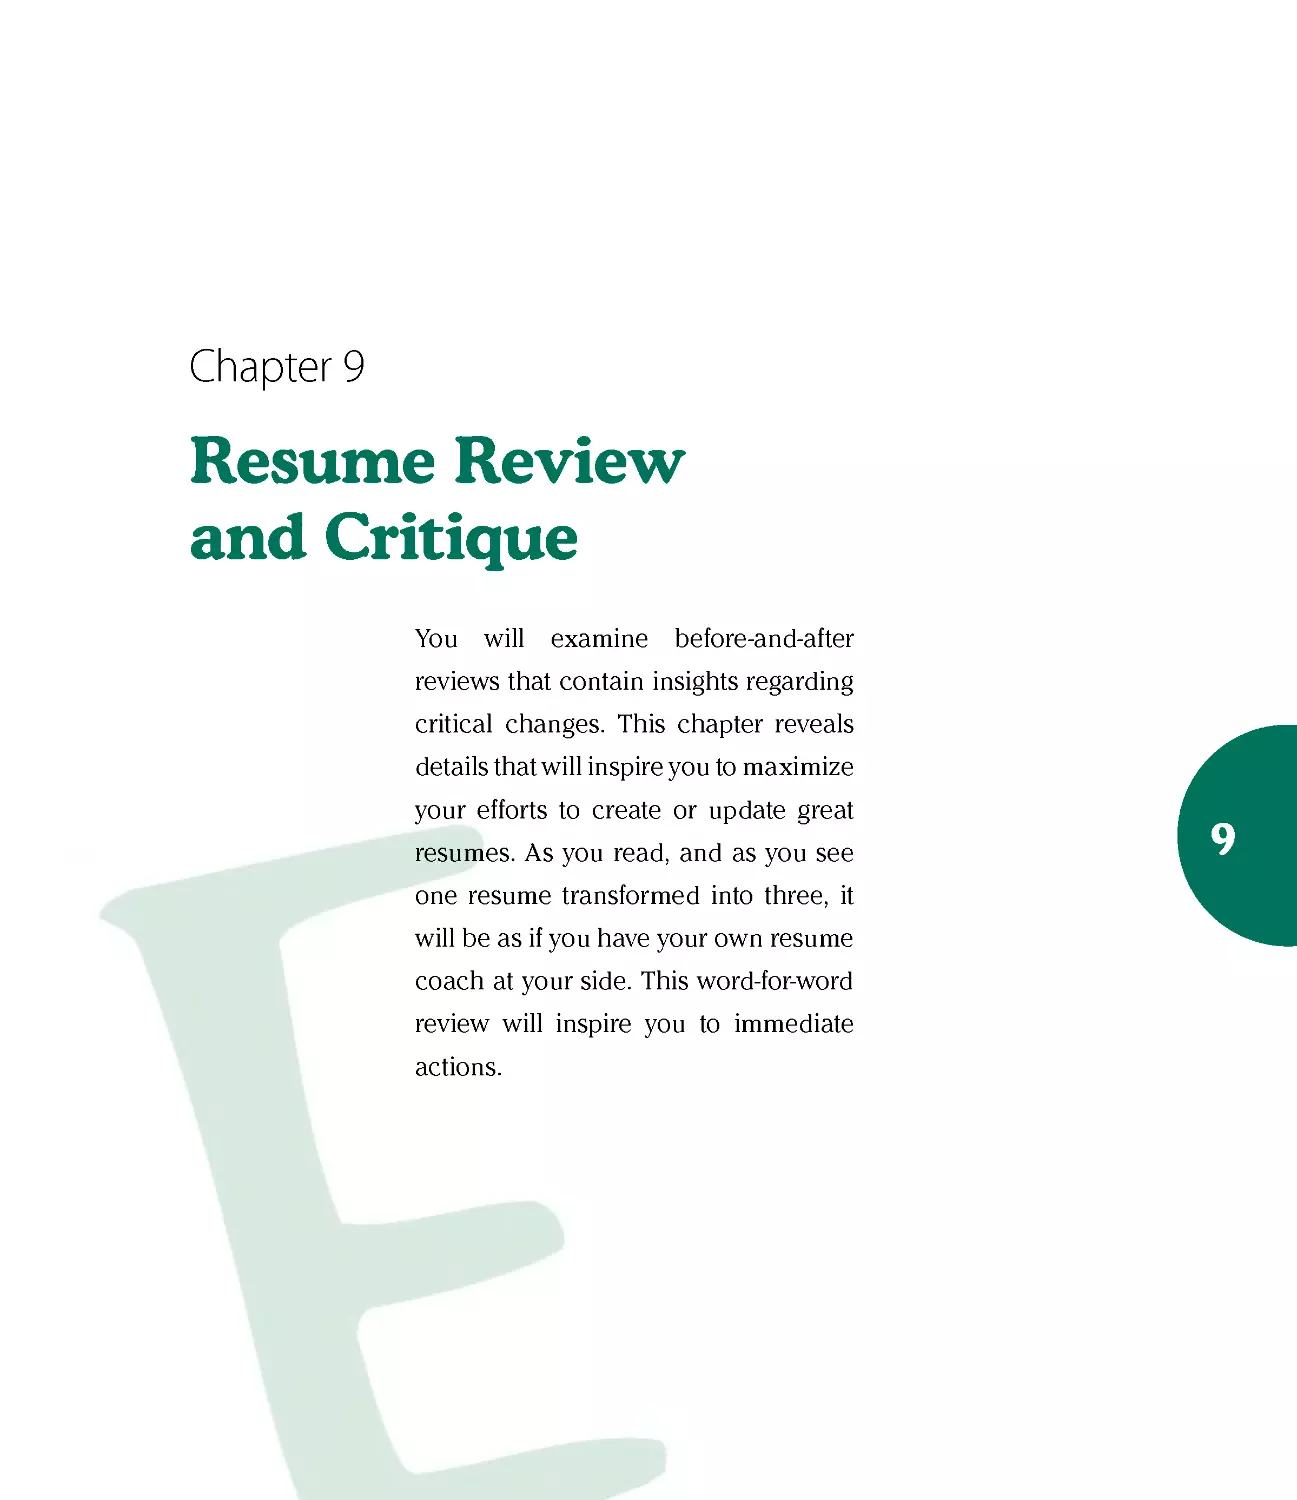 Chapter 9: Resume Review and Critique